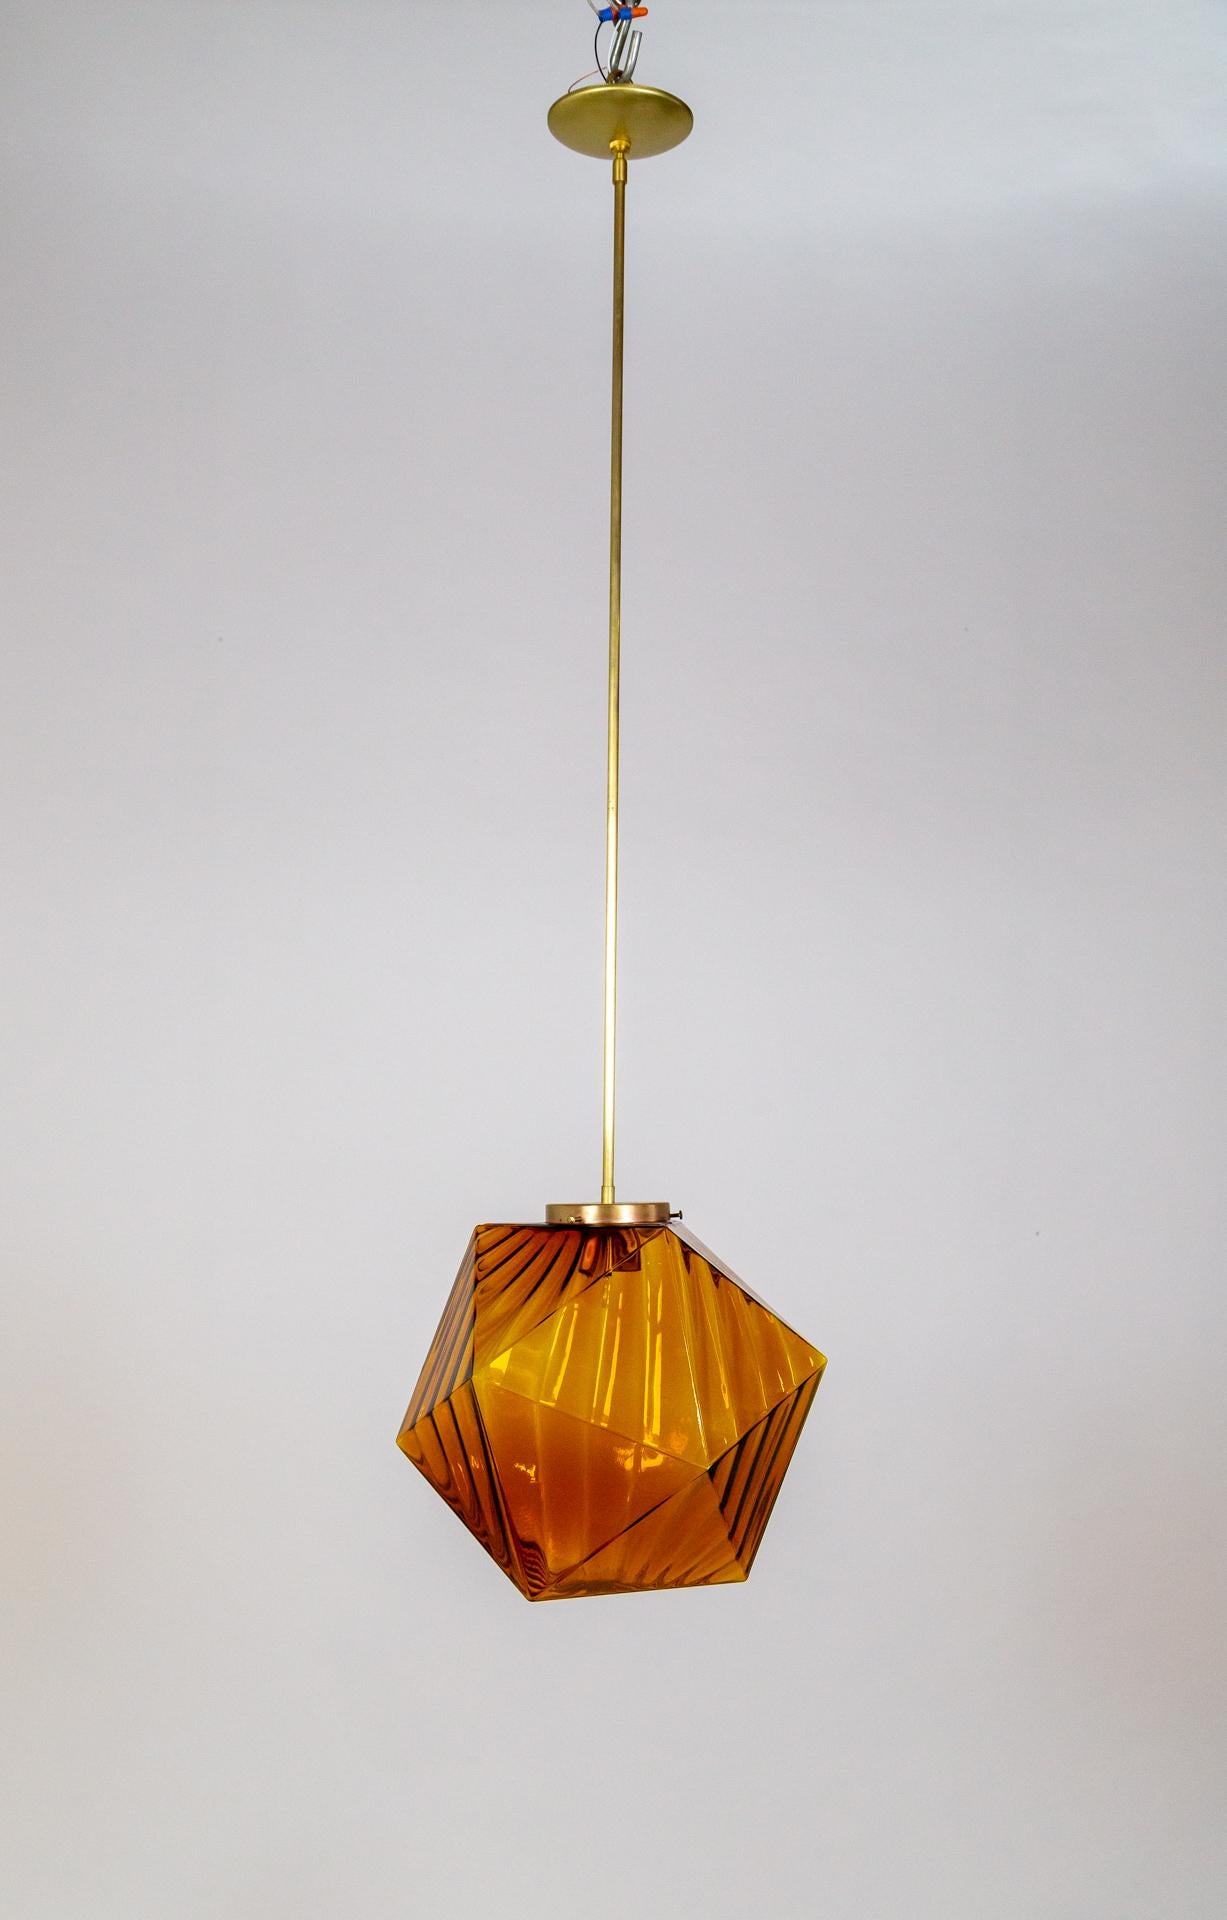 A 1970s pendant light in the form of an icosahedron- a 20-sided polyhedron.  Made of amber-orange glass with a striped effect that has a rippled look.  It has a long, thin brass stem. Newly rewired. 
13